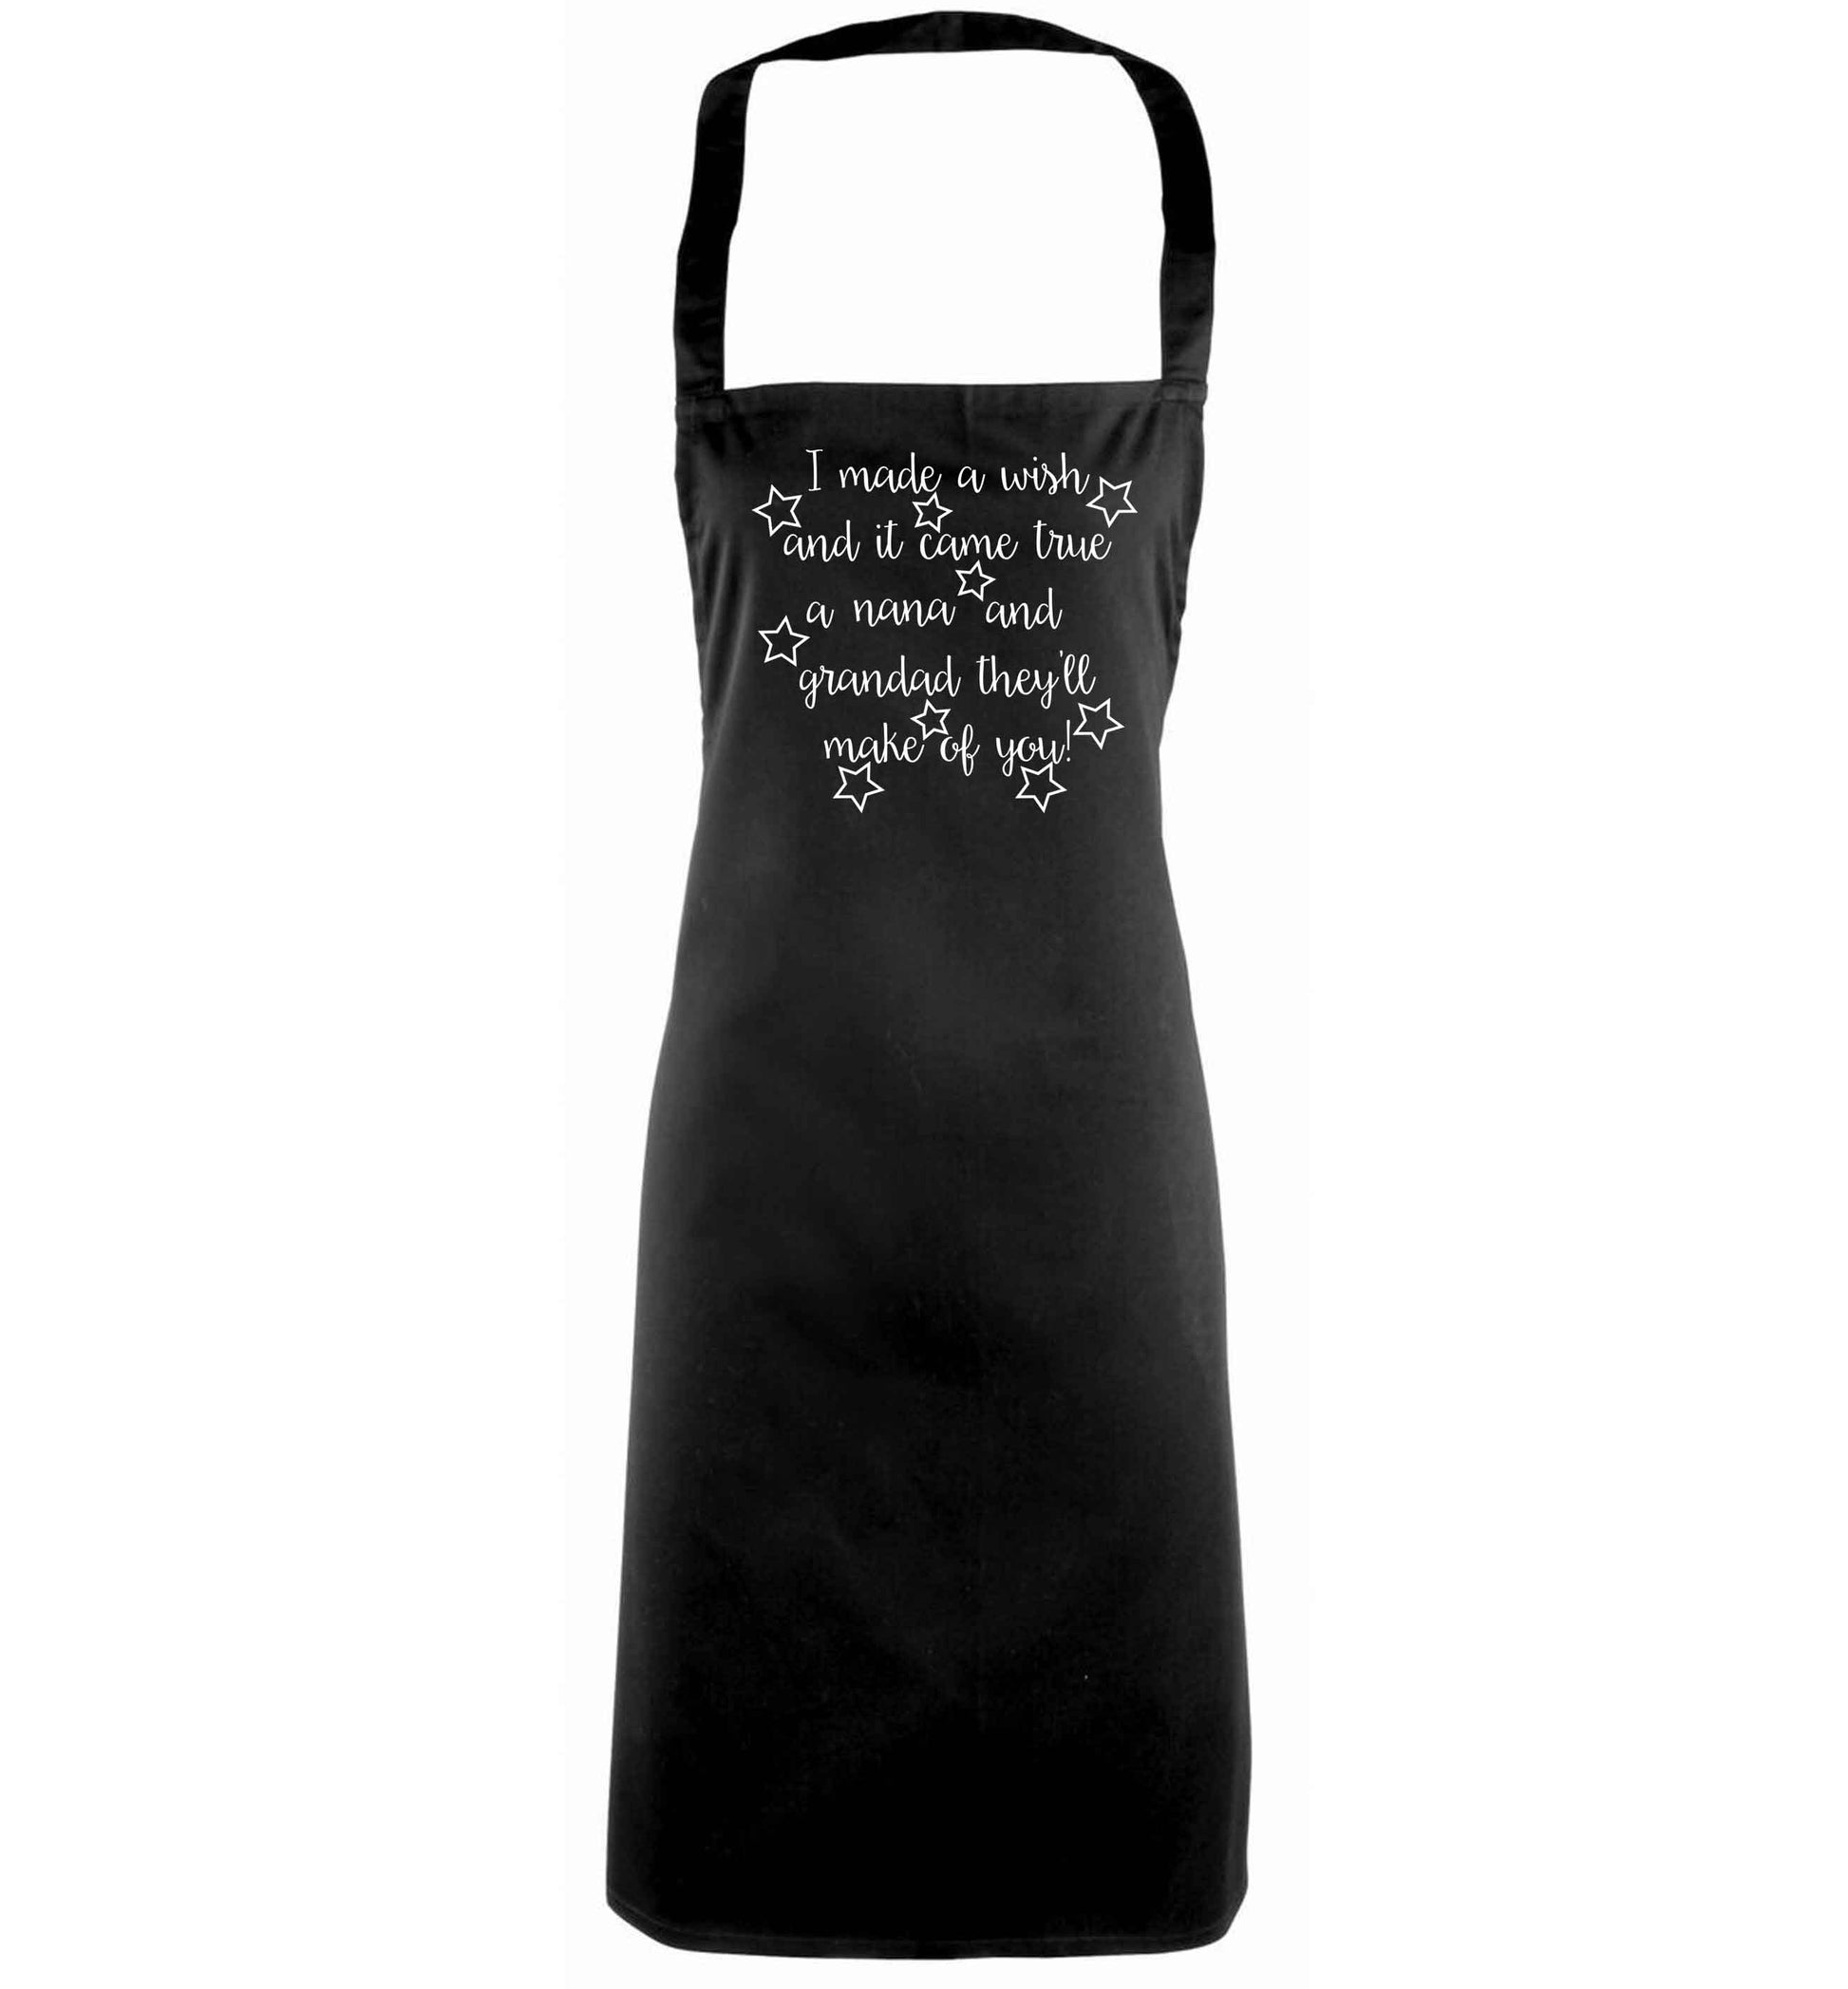 I made a wish and it came true a nana and grandad they'll make of you! black apron